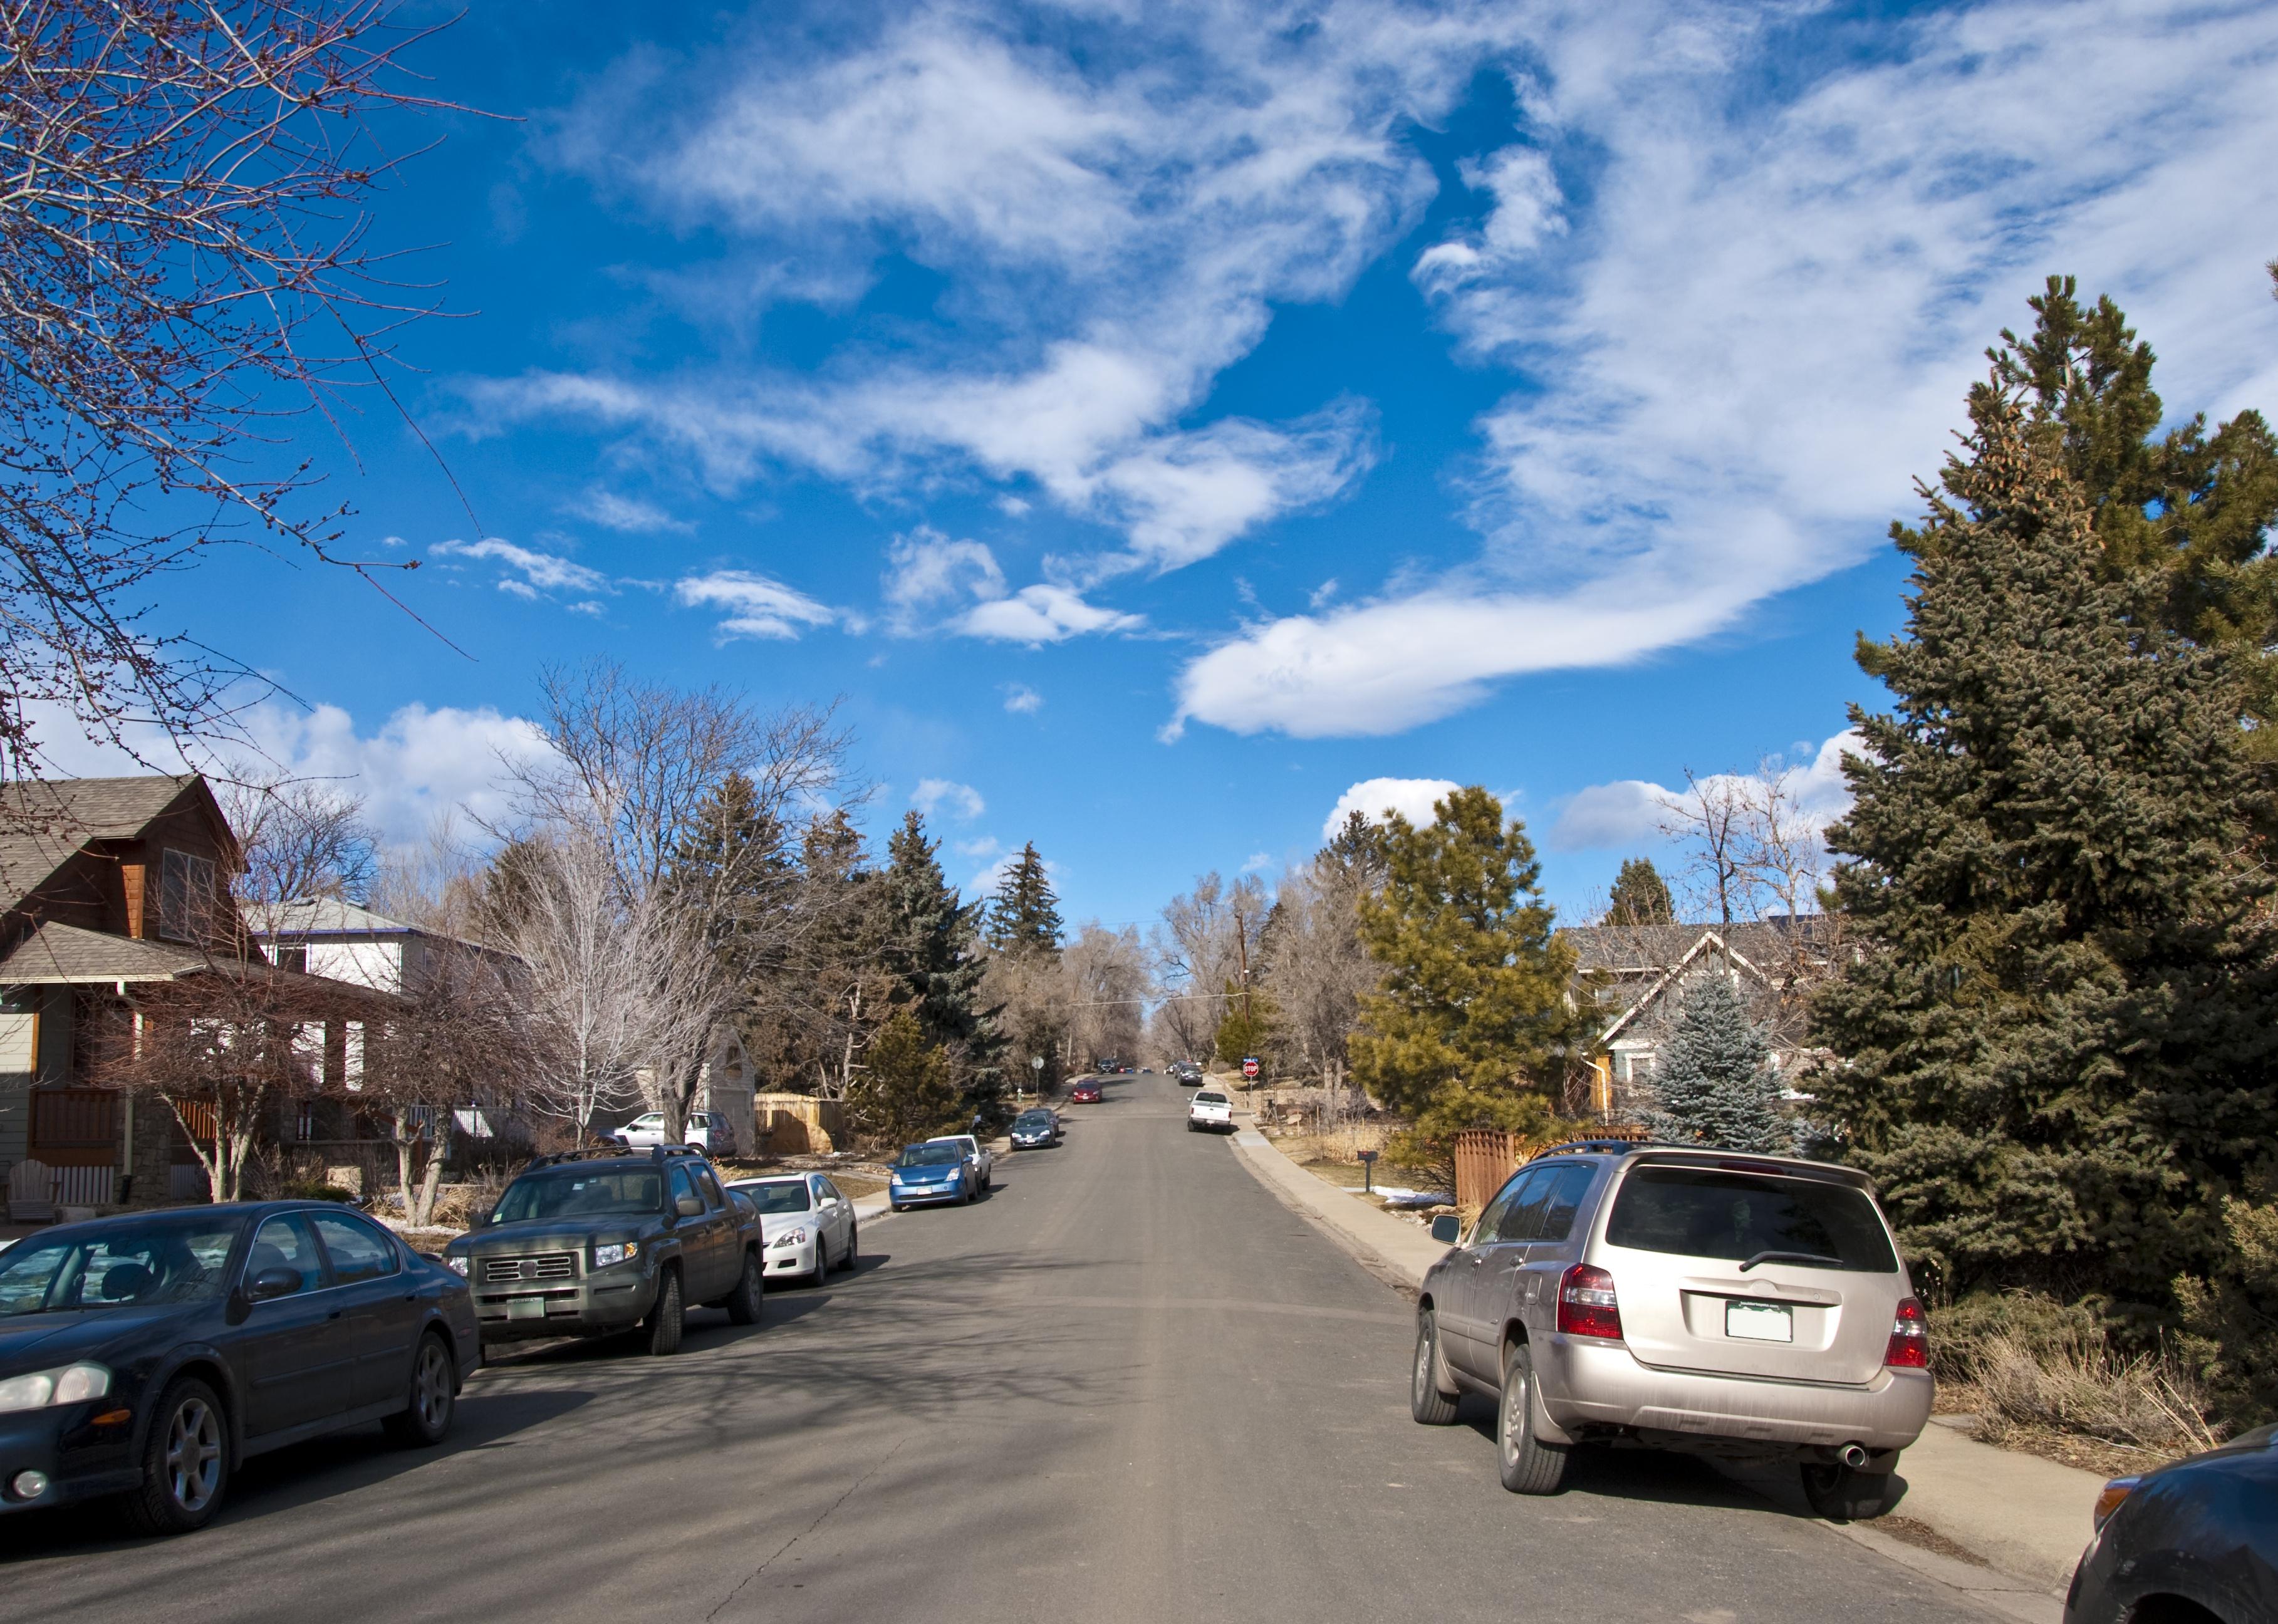 Suburban street scene with cars parked on street.